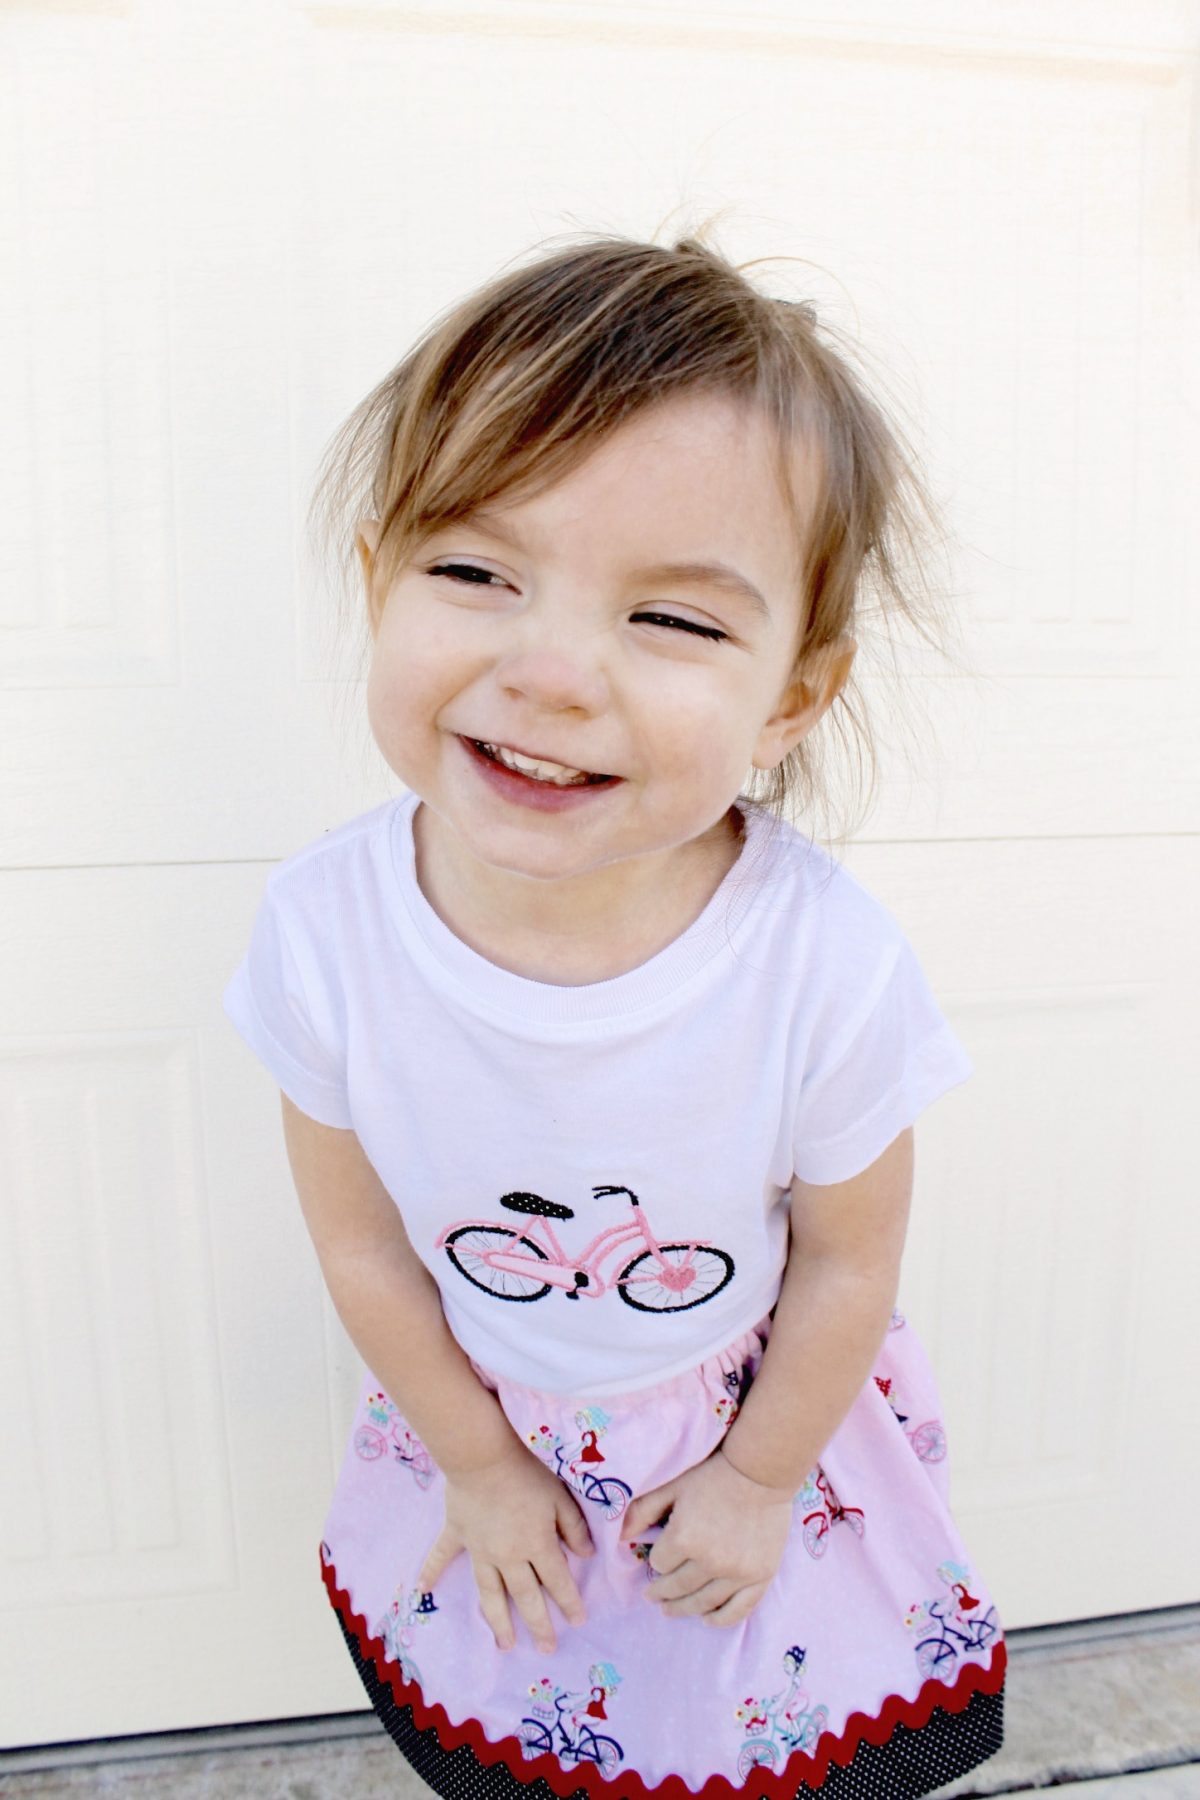 Little Girl wearing bicycle shirt and smiling toddler's favorite things